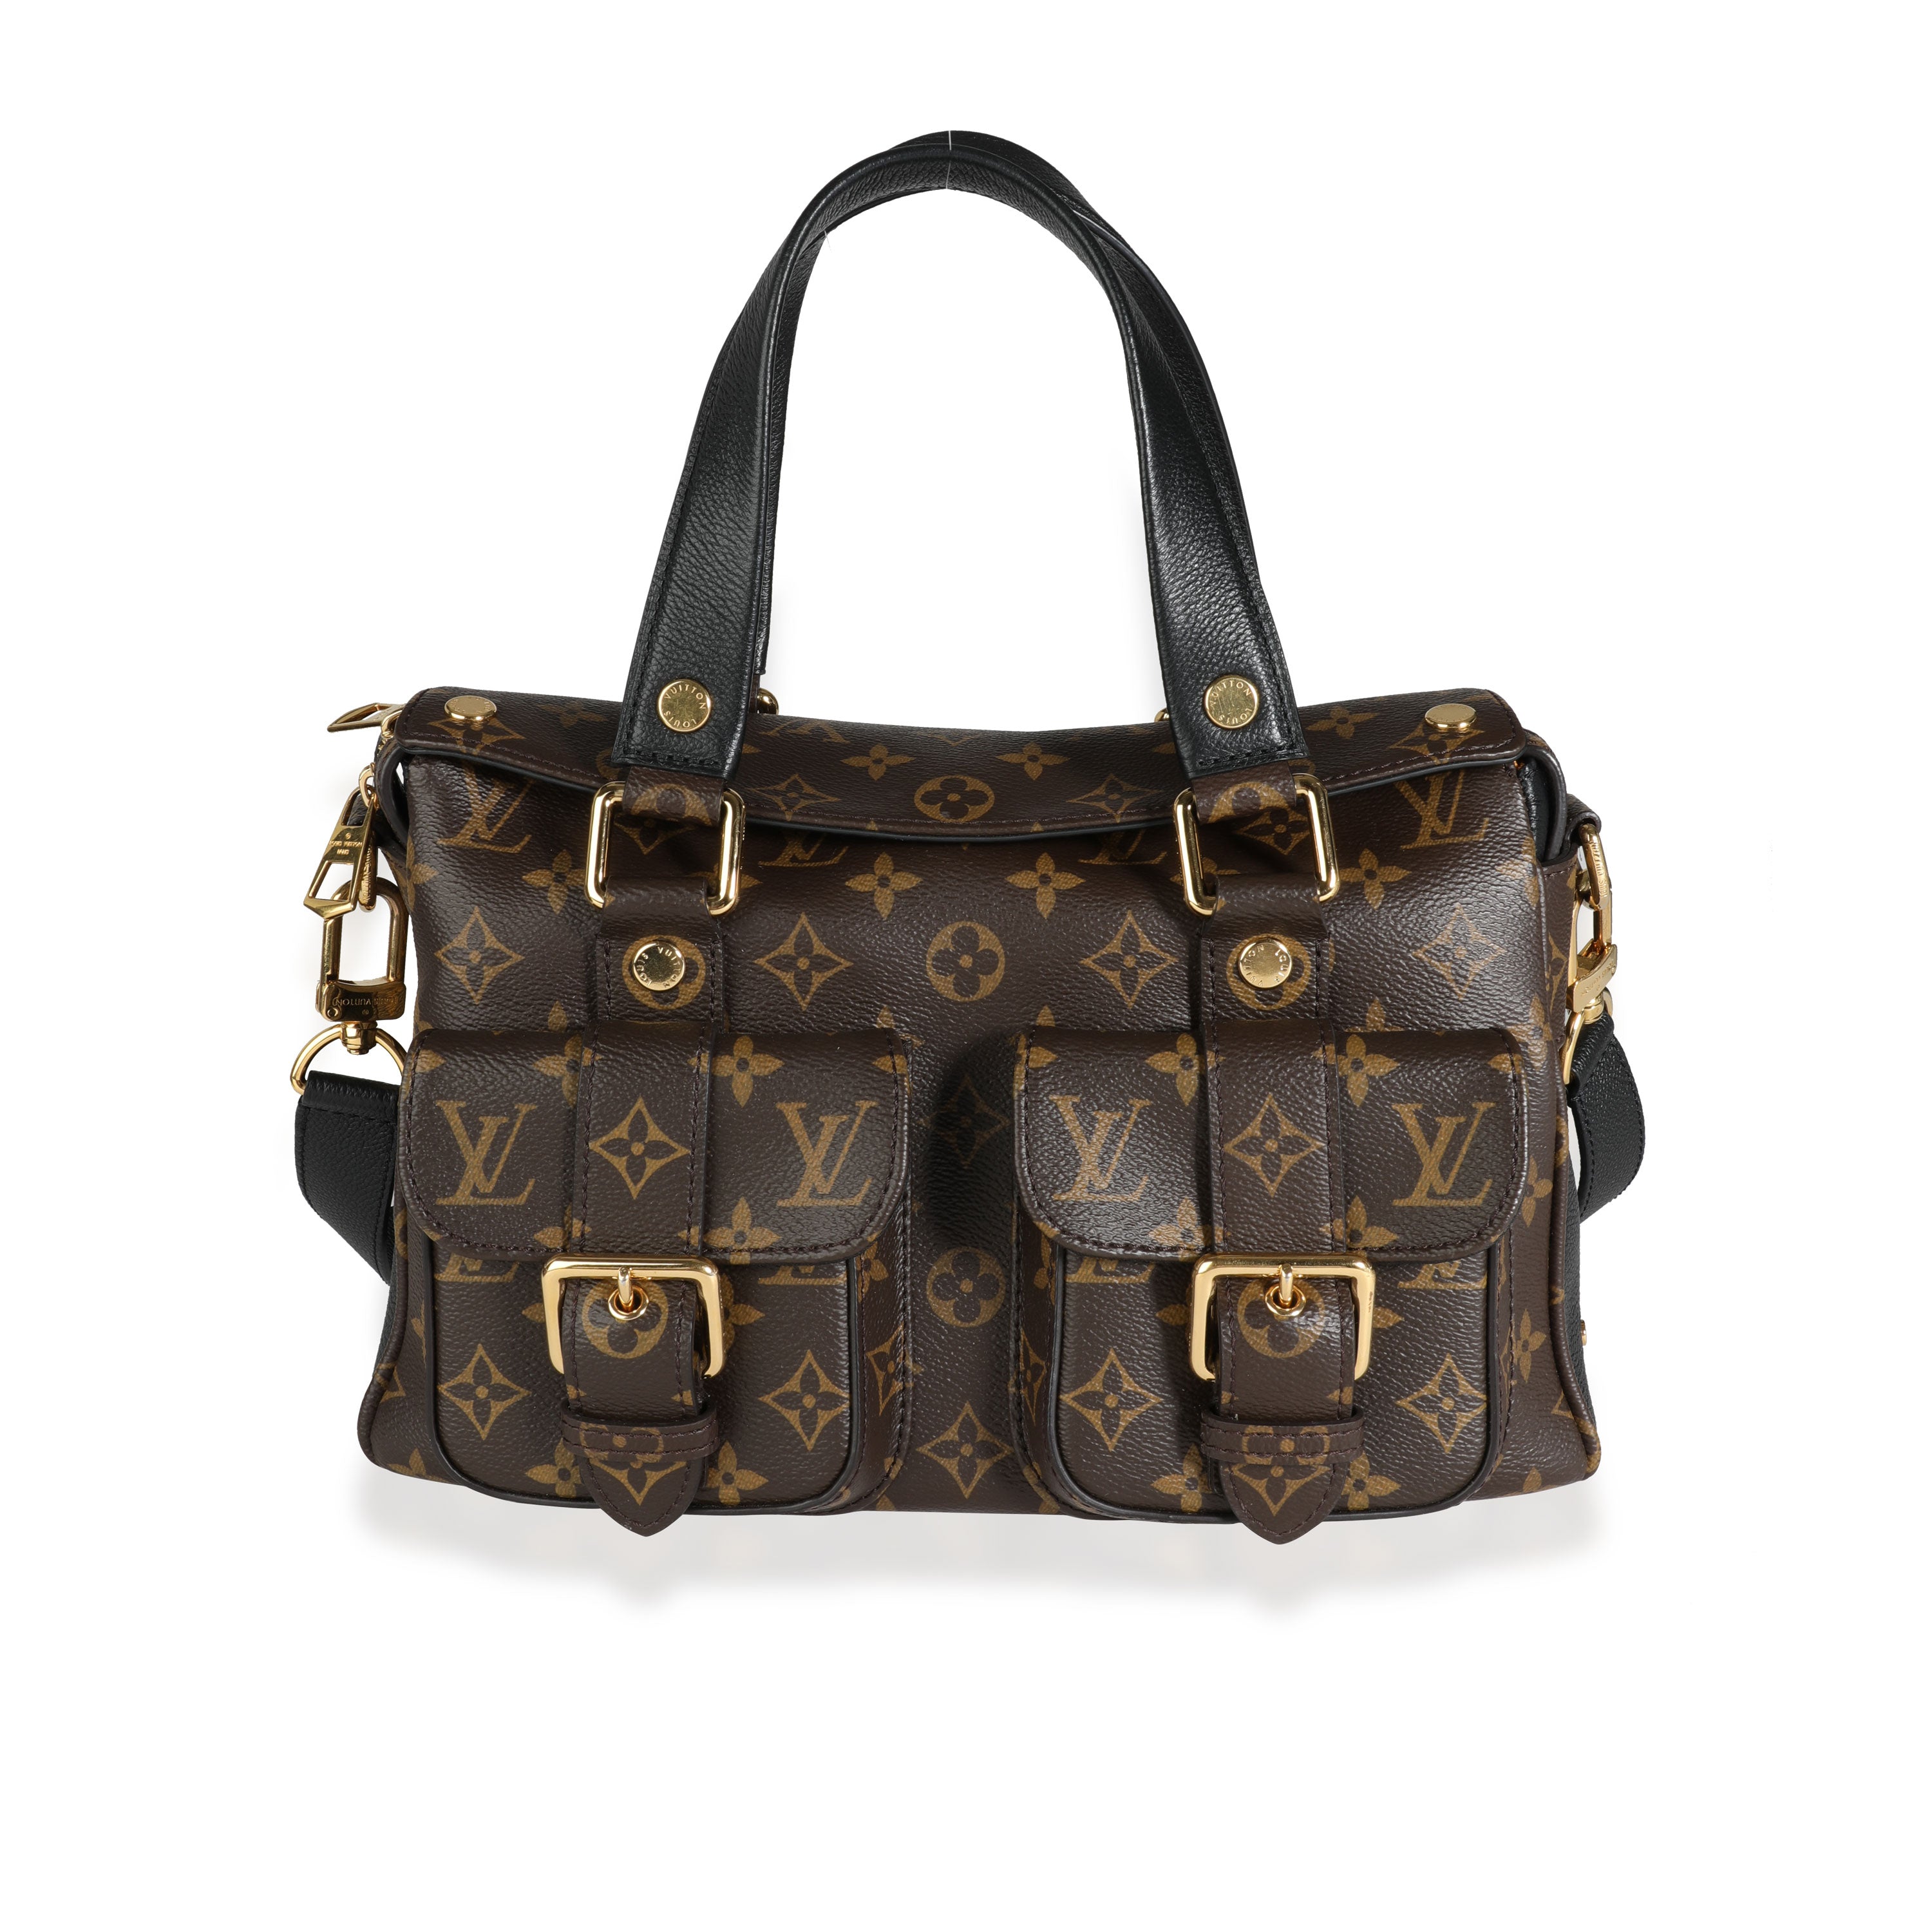 Why Is The Louis Vuitton Neverfull Always Out Of Stock?, myGemma